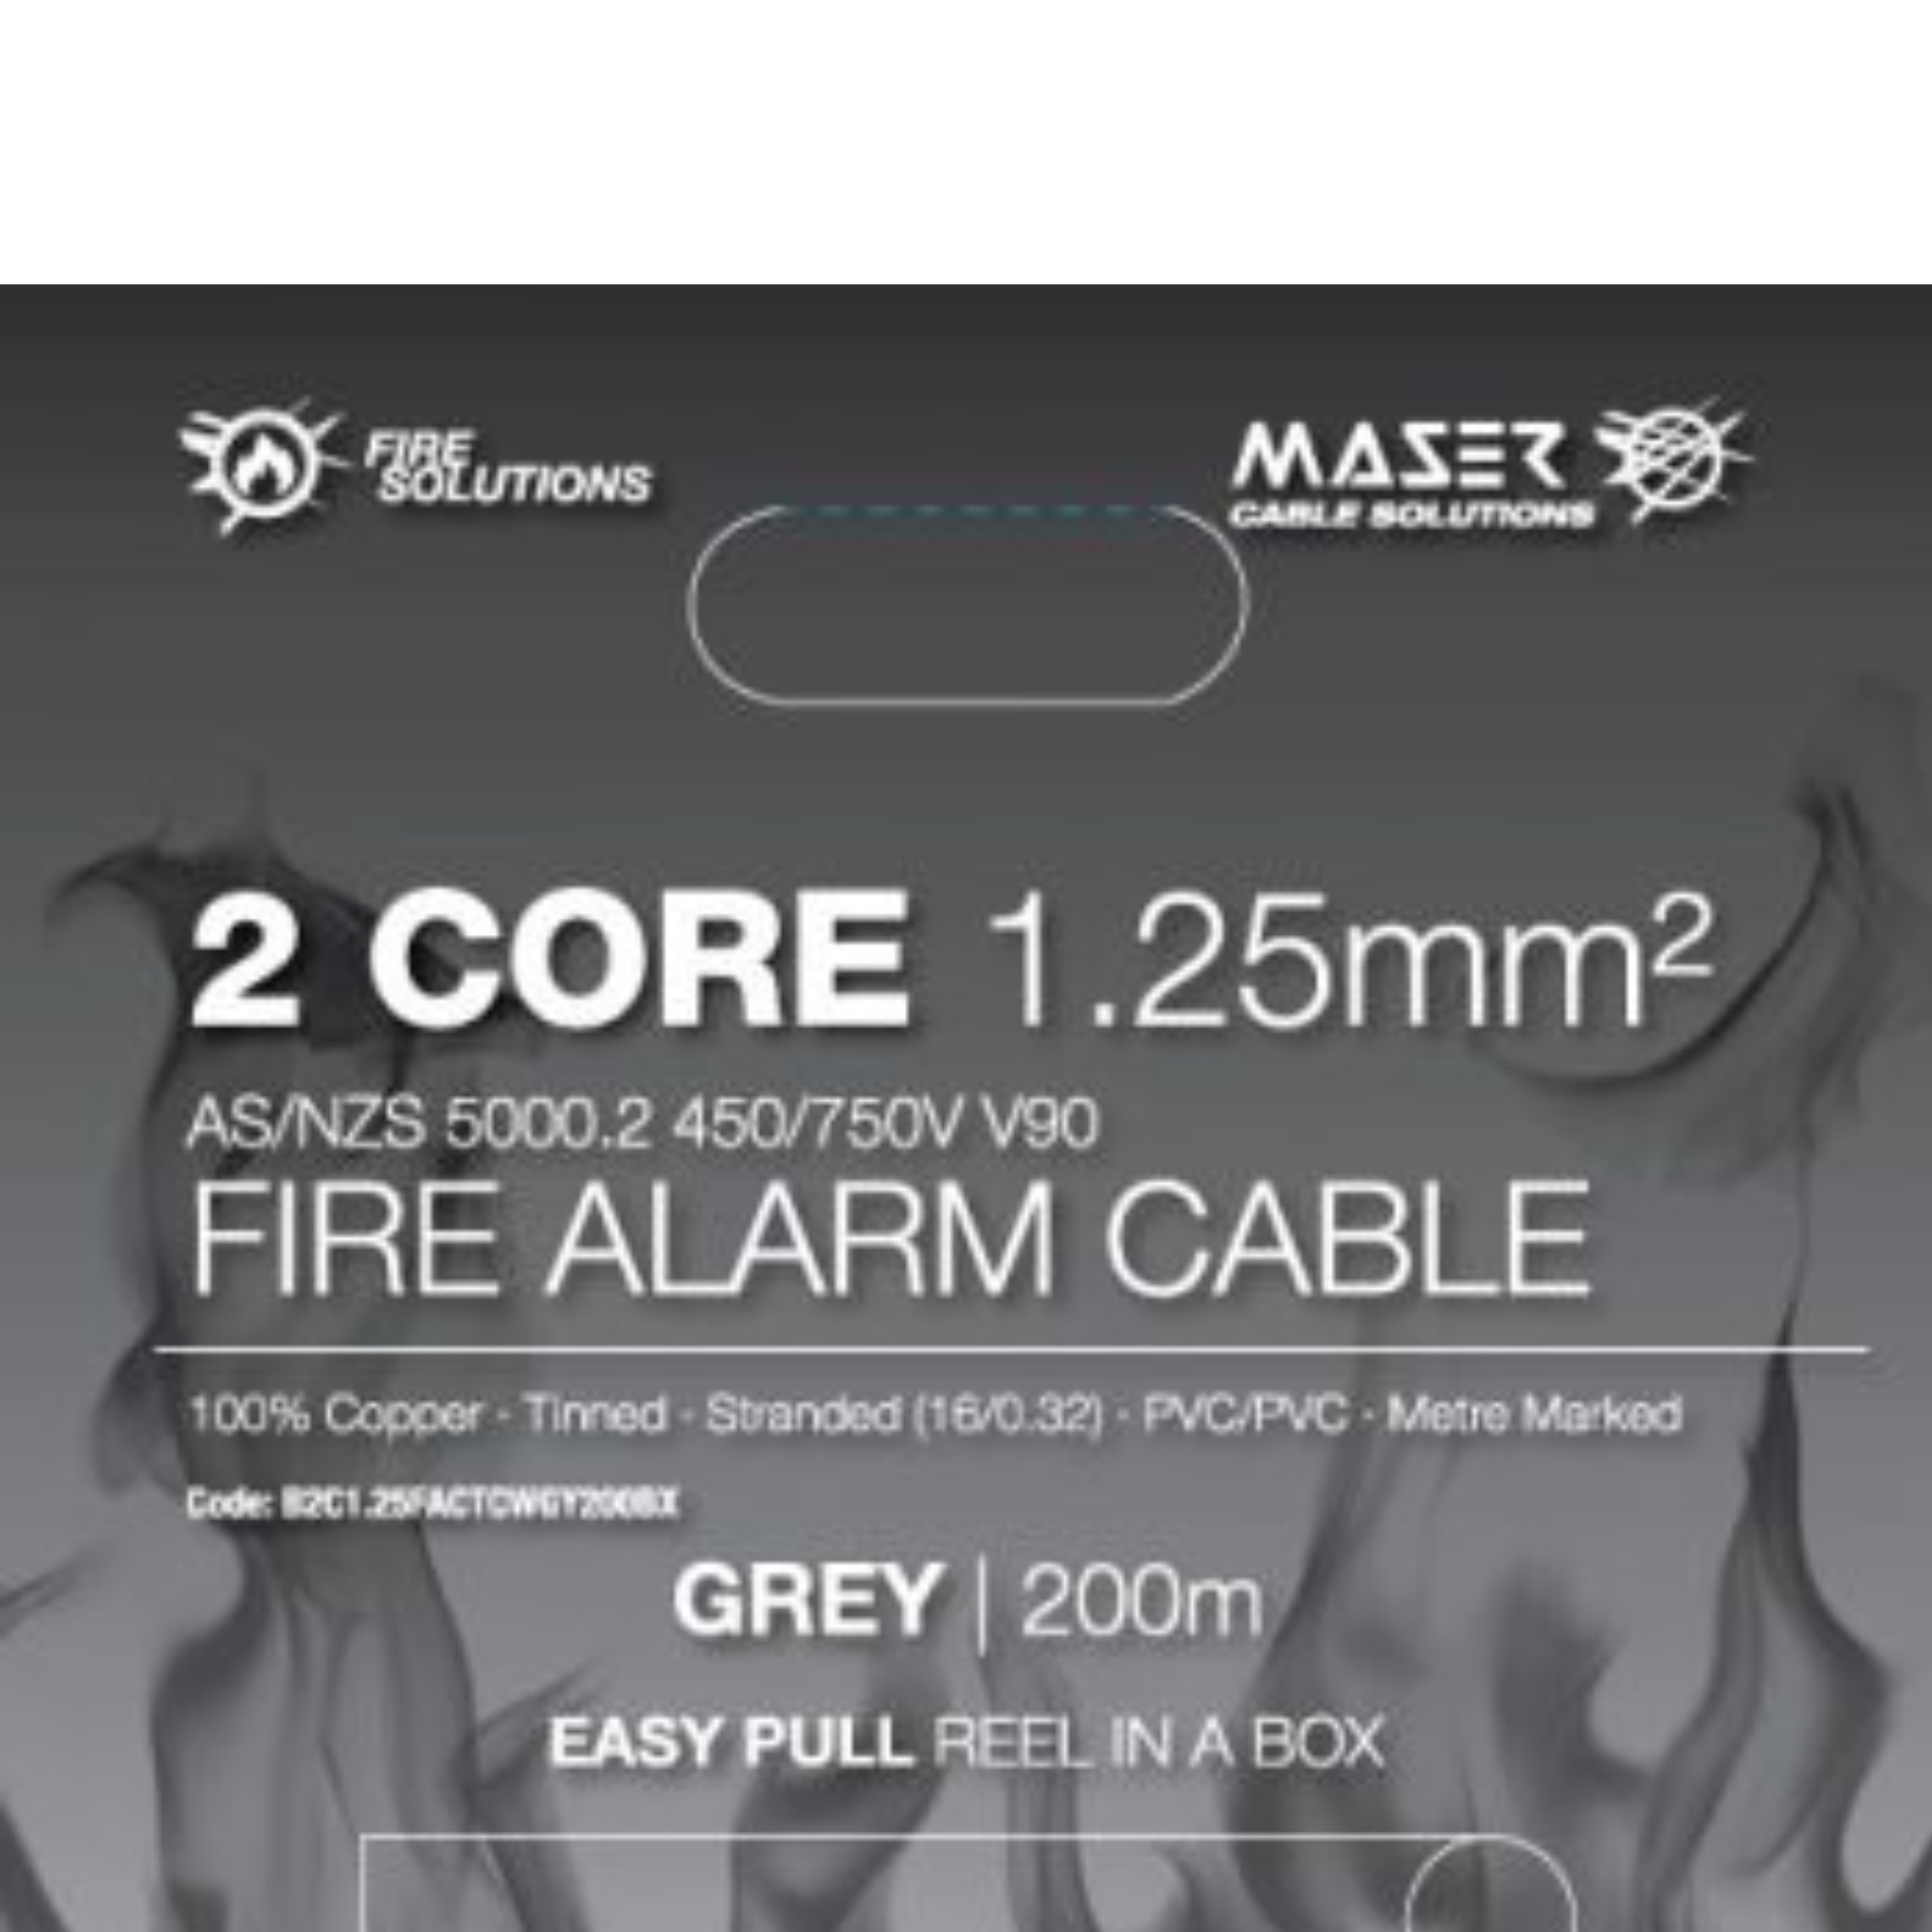 1.25mm Fire Alarm Cable